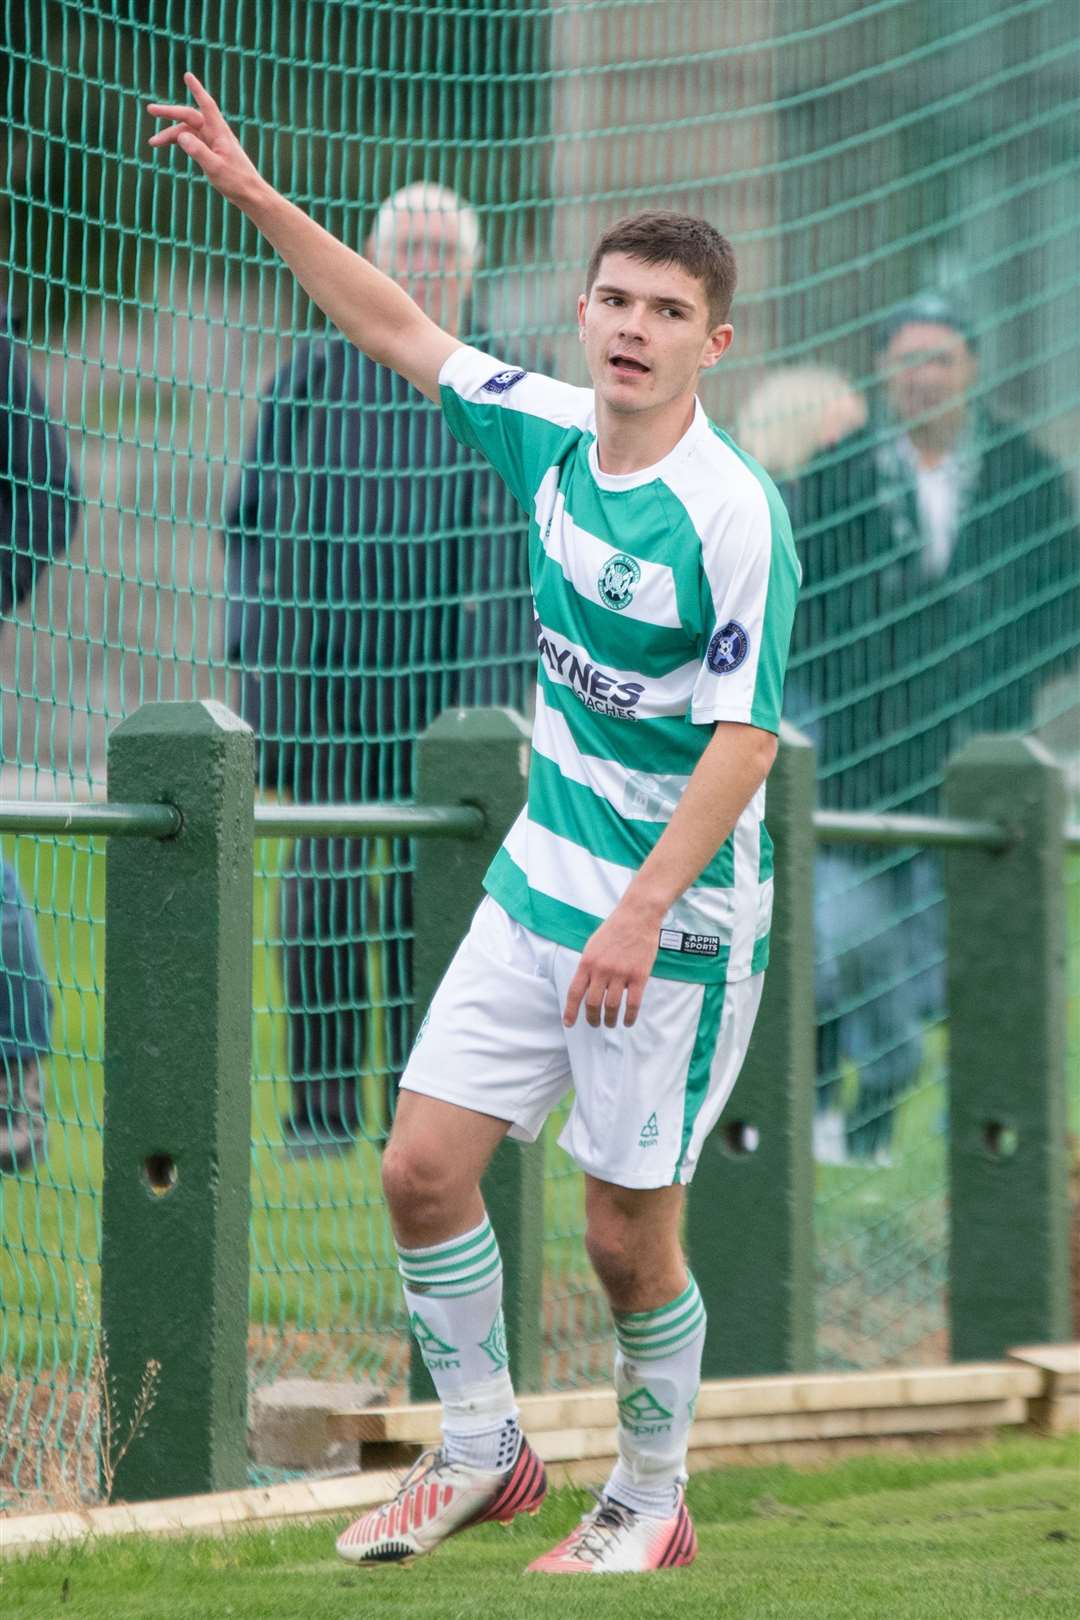 Buckie Thistle's Marcus Goodall celebrates his goal as the Jags make it 6-0...Buckie Thistle FC (6) vs Nairn County FC (0) - Highland Football League 23/24 - Victoria Park, Buckie 30/09/2023...Picture: Daniel Forsyth..